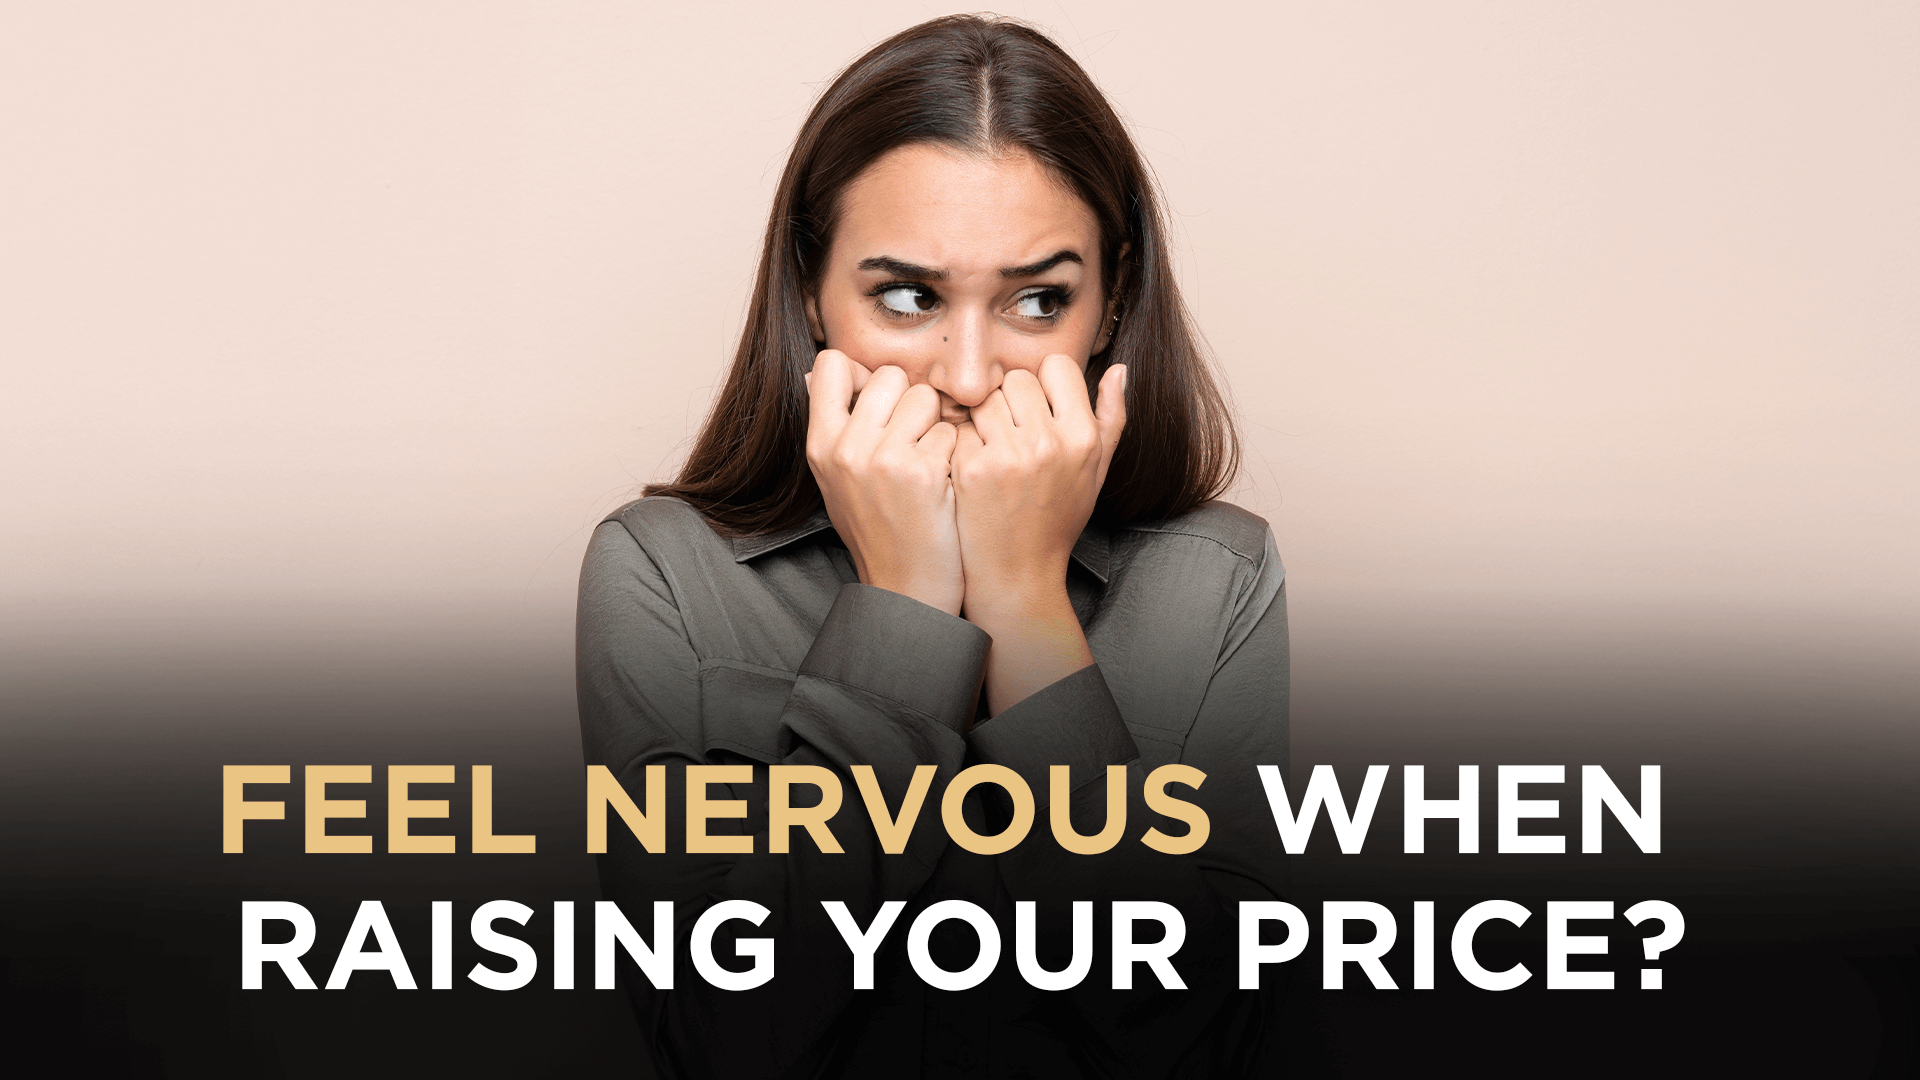 Feel nervous when raising your price